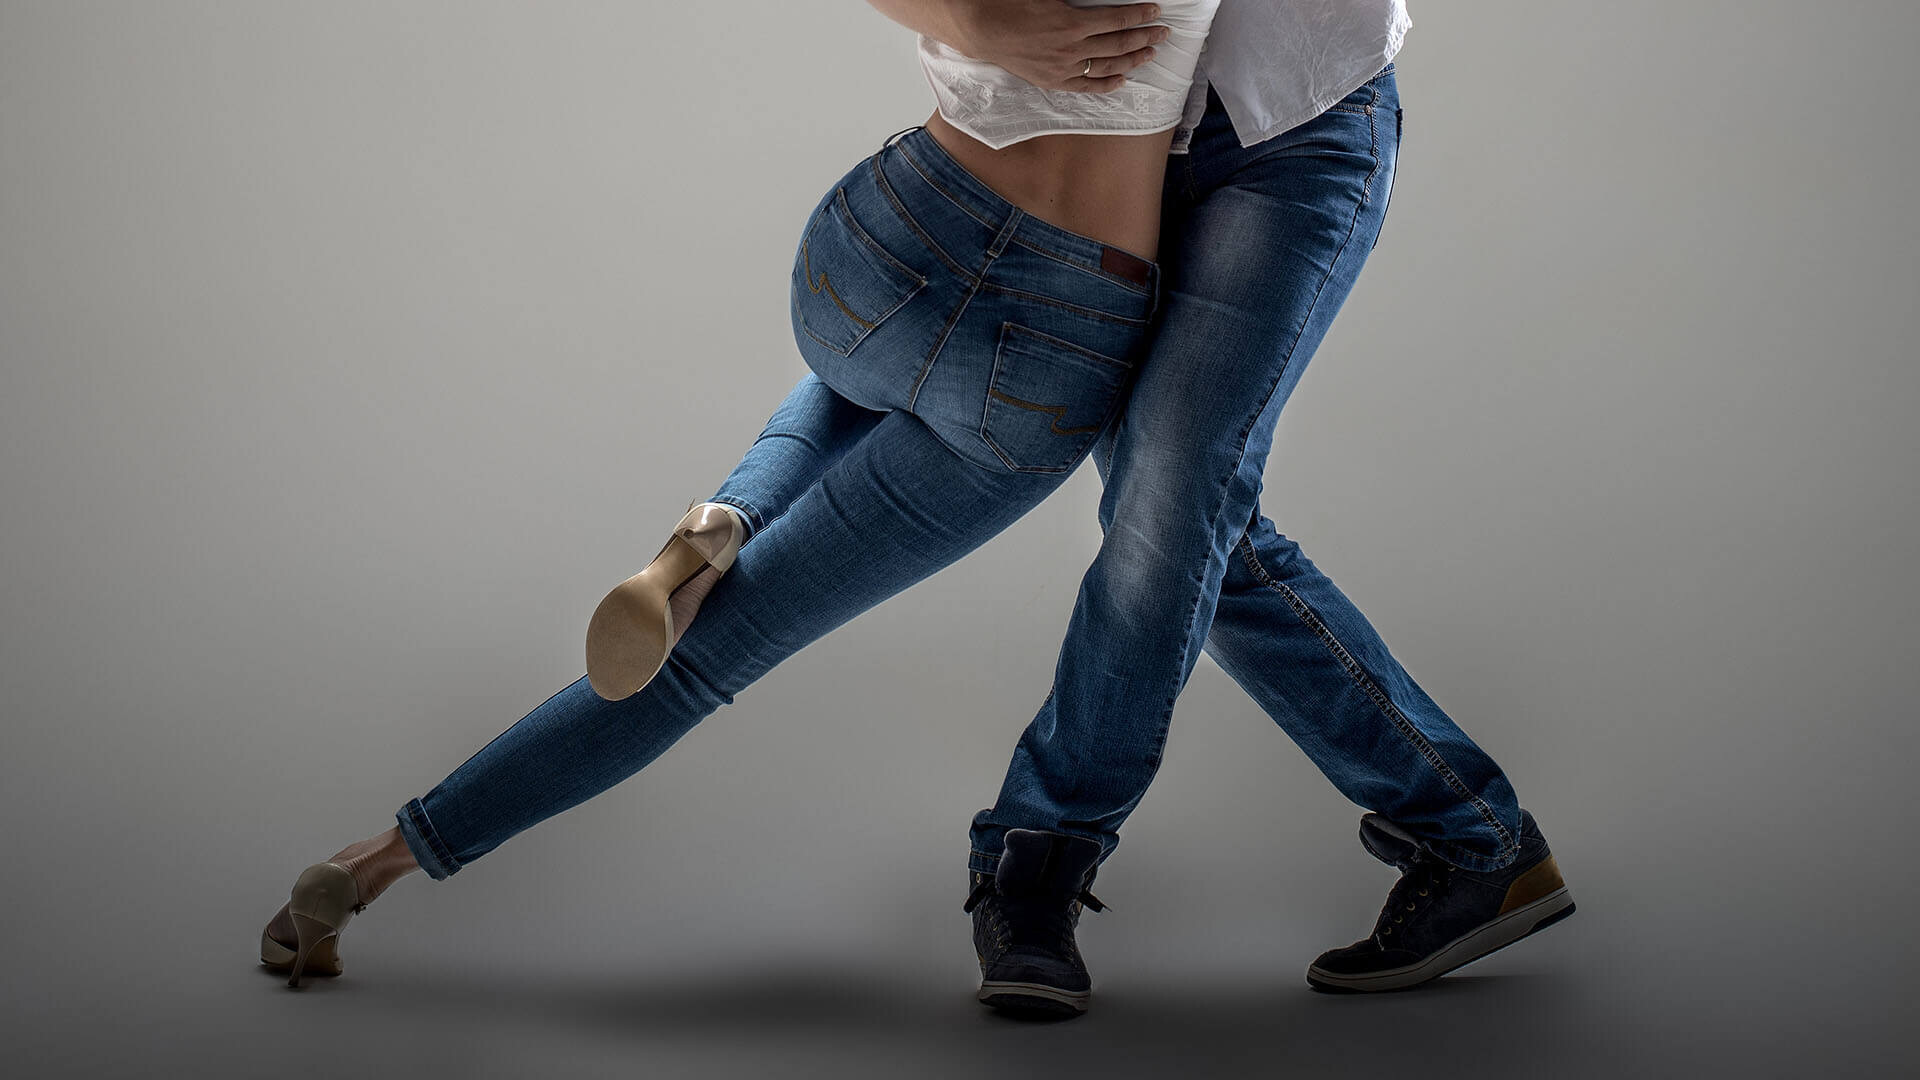 Kizomba: A slow dance, that combine knee flexion with ascending and descending rhythms, as well as hip rotations. 1920x1080 Full HD Wallpaper.